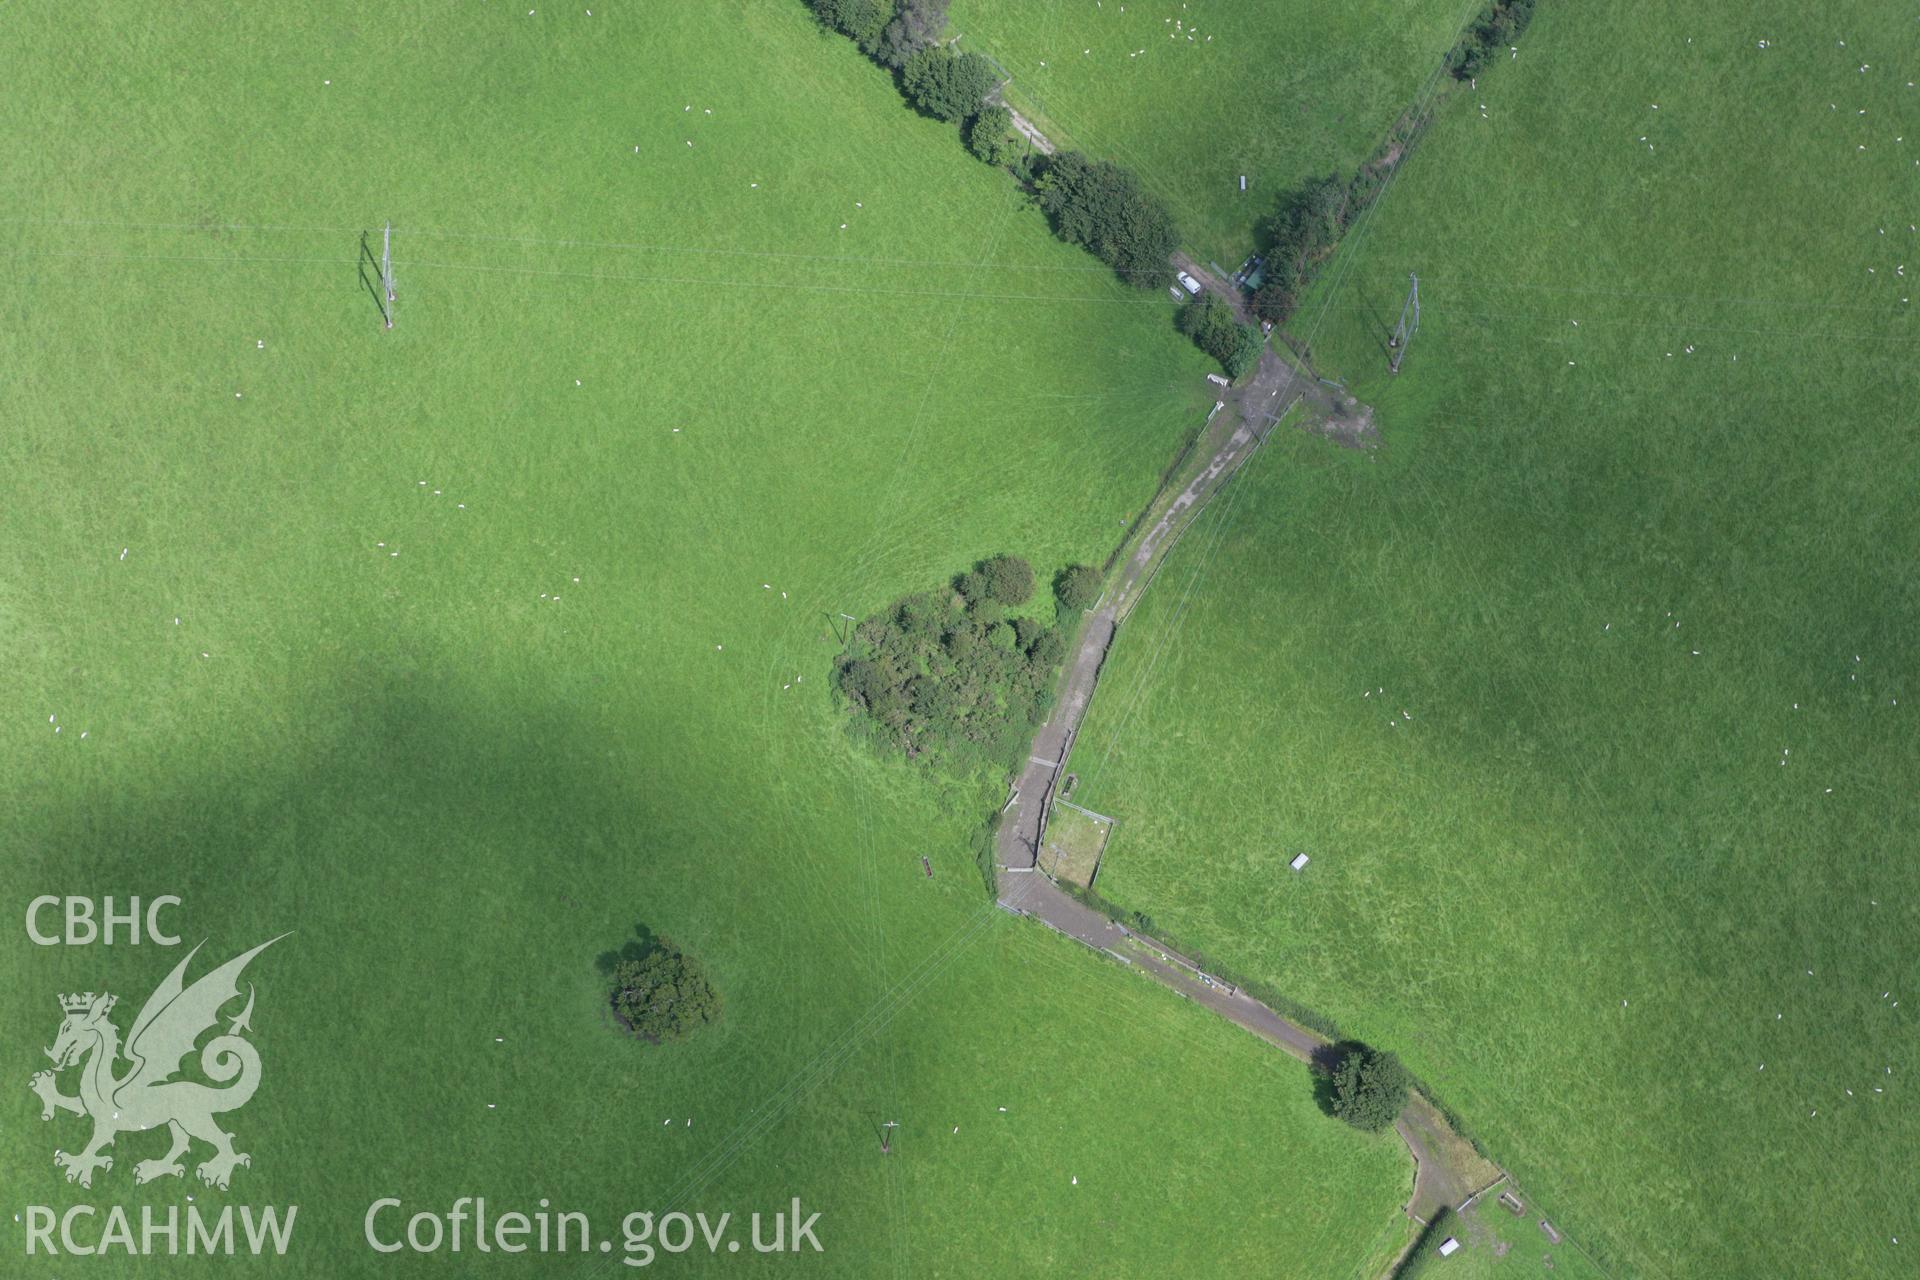 RCAHMW colour oblique aerial photograph of Hafod-y-Bwlch Barrow. Taken on 24 July 2007 by Toby Driver